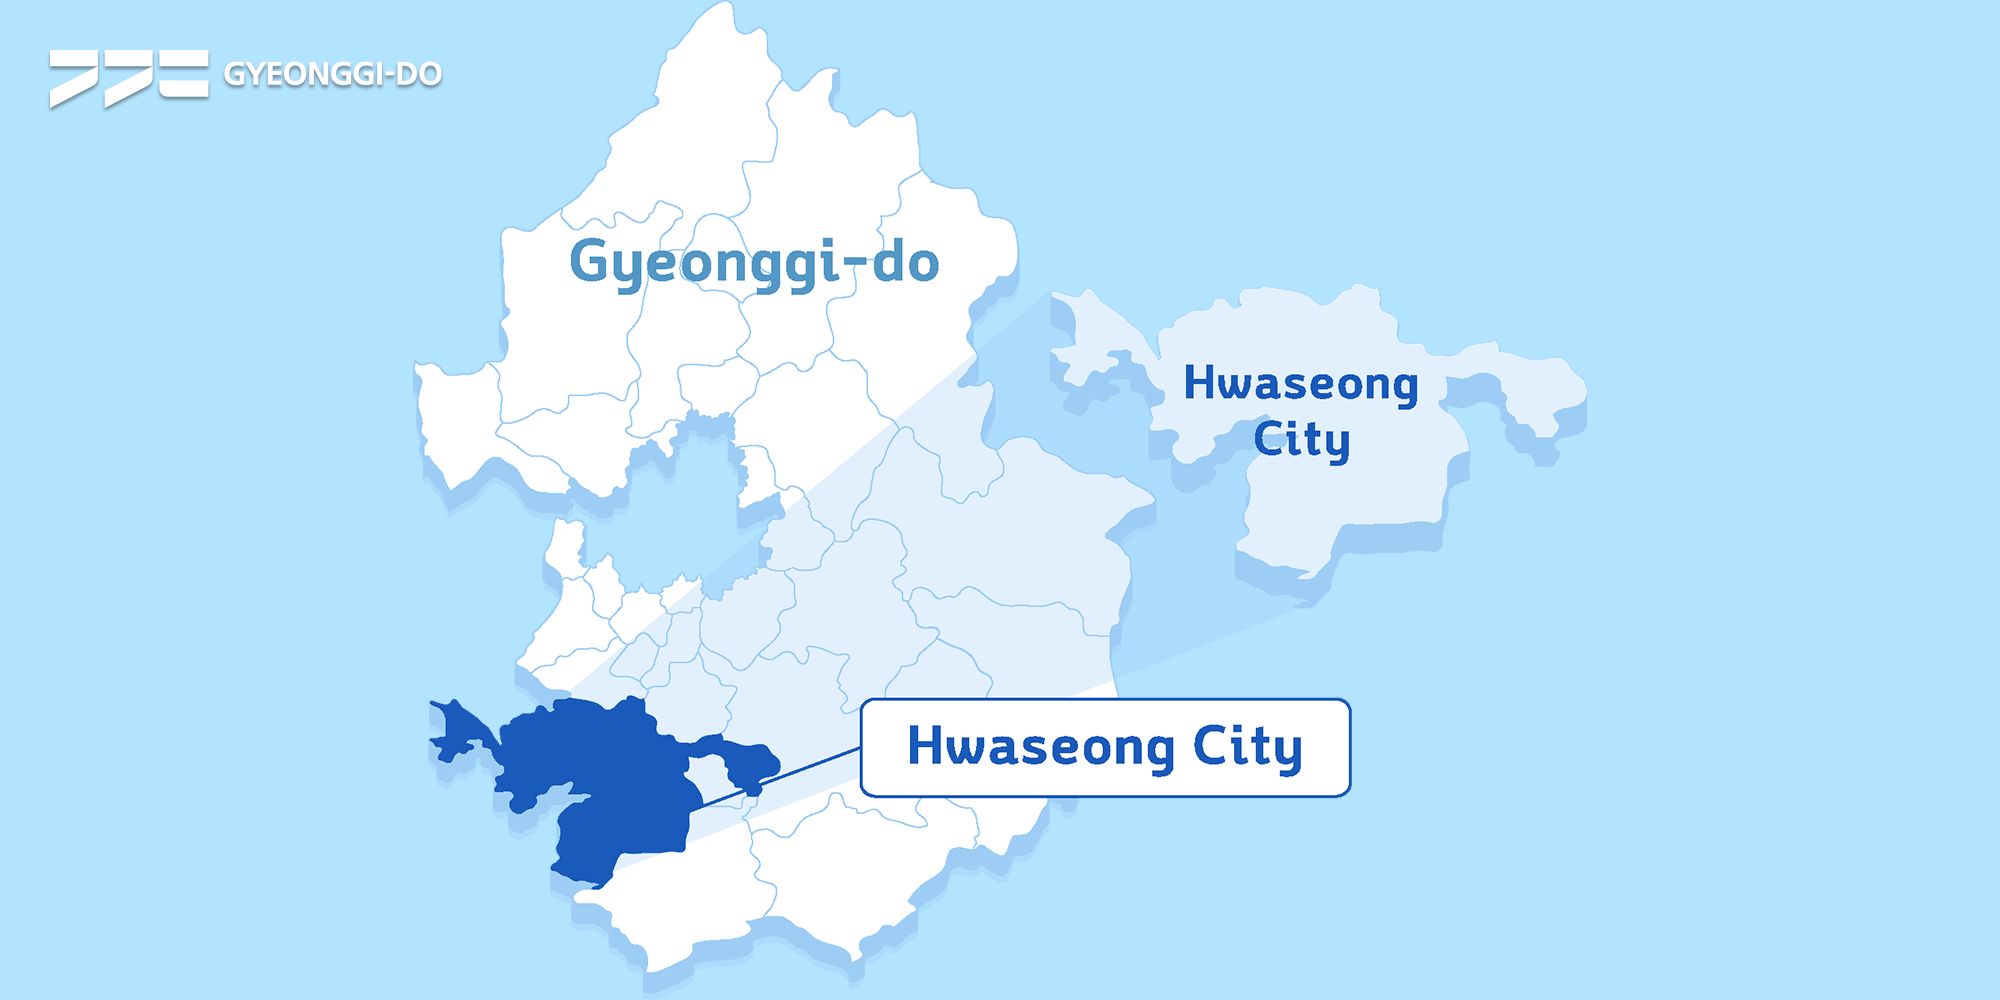 Hwaseong City is making efforts to develop as a good city in which to live through such endeavors as “carbon zero” initiatives, smart logistics, and human health care while integrating the characteristics of an industrial city.